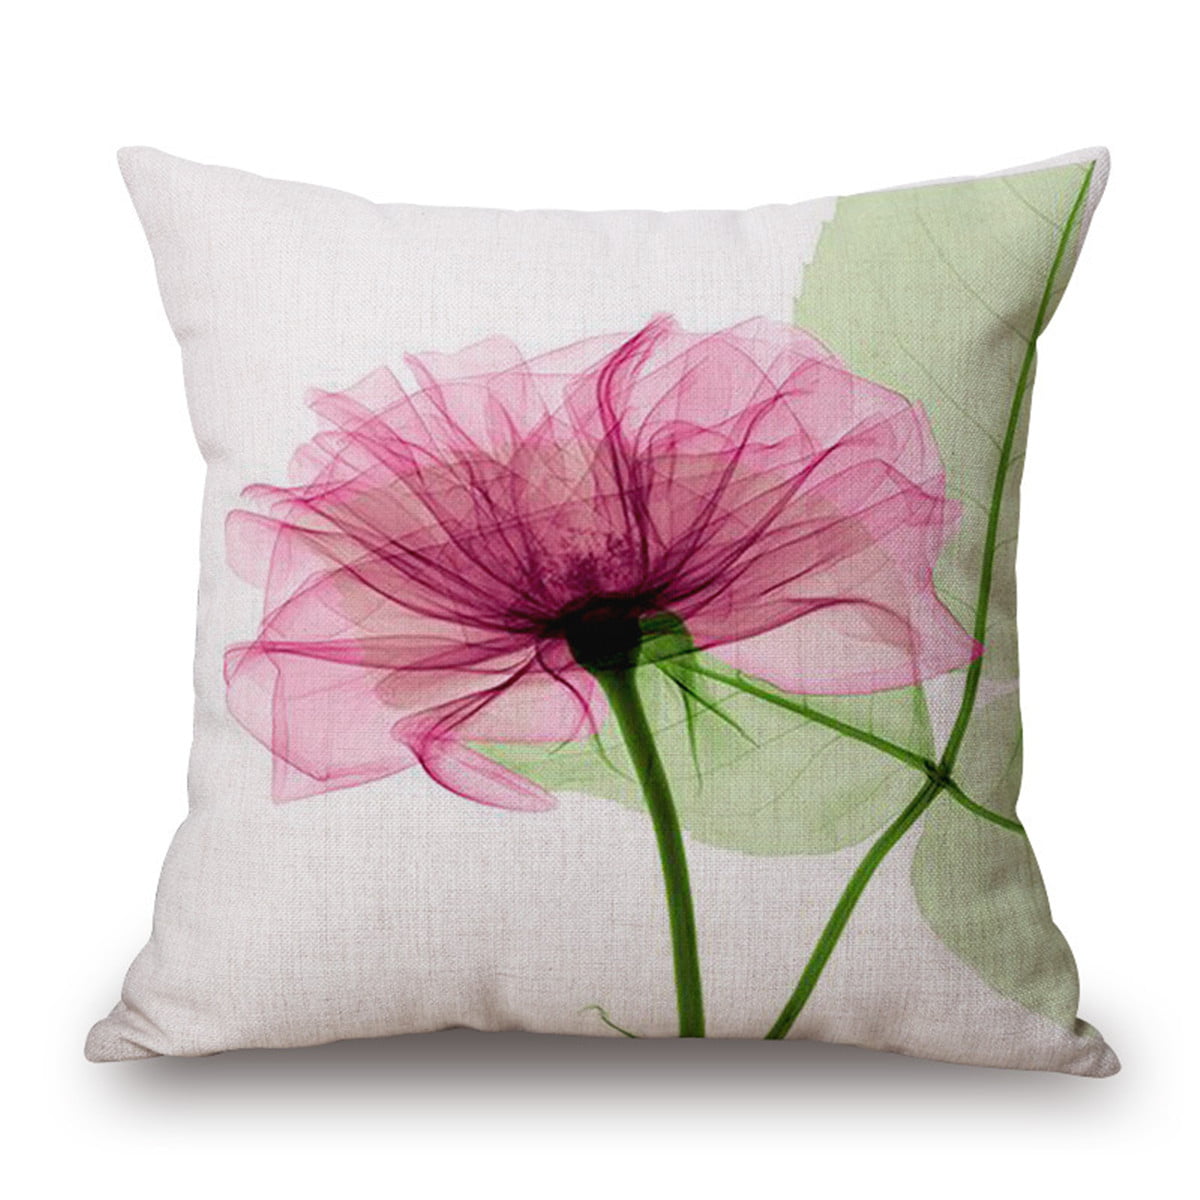 Oil Painting Pretty Poppy Flower Cotton Linen Throw Pillow Case Cushion Cover Home Sofa Balcony Decorative 18 X 18 Inch